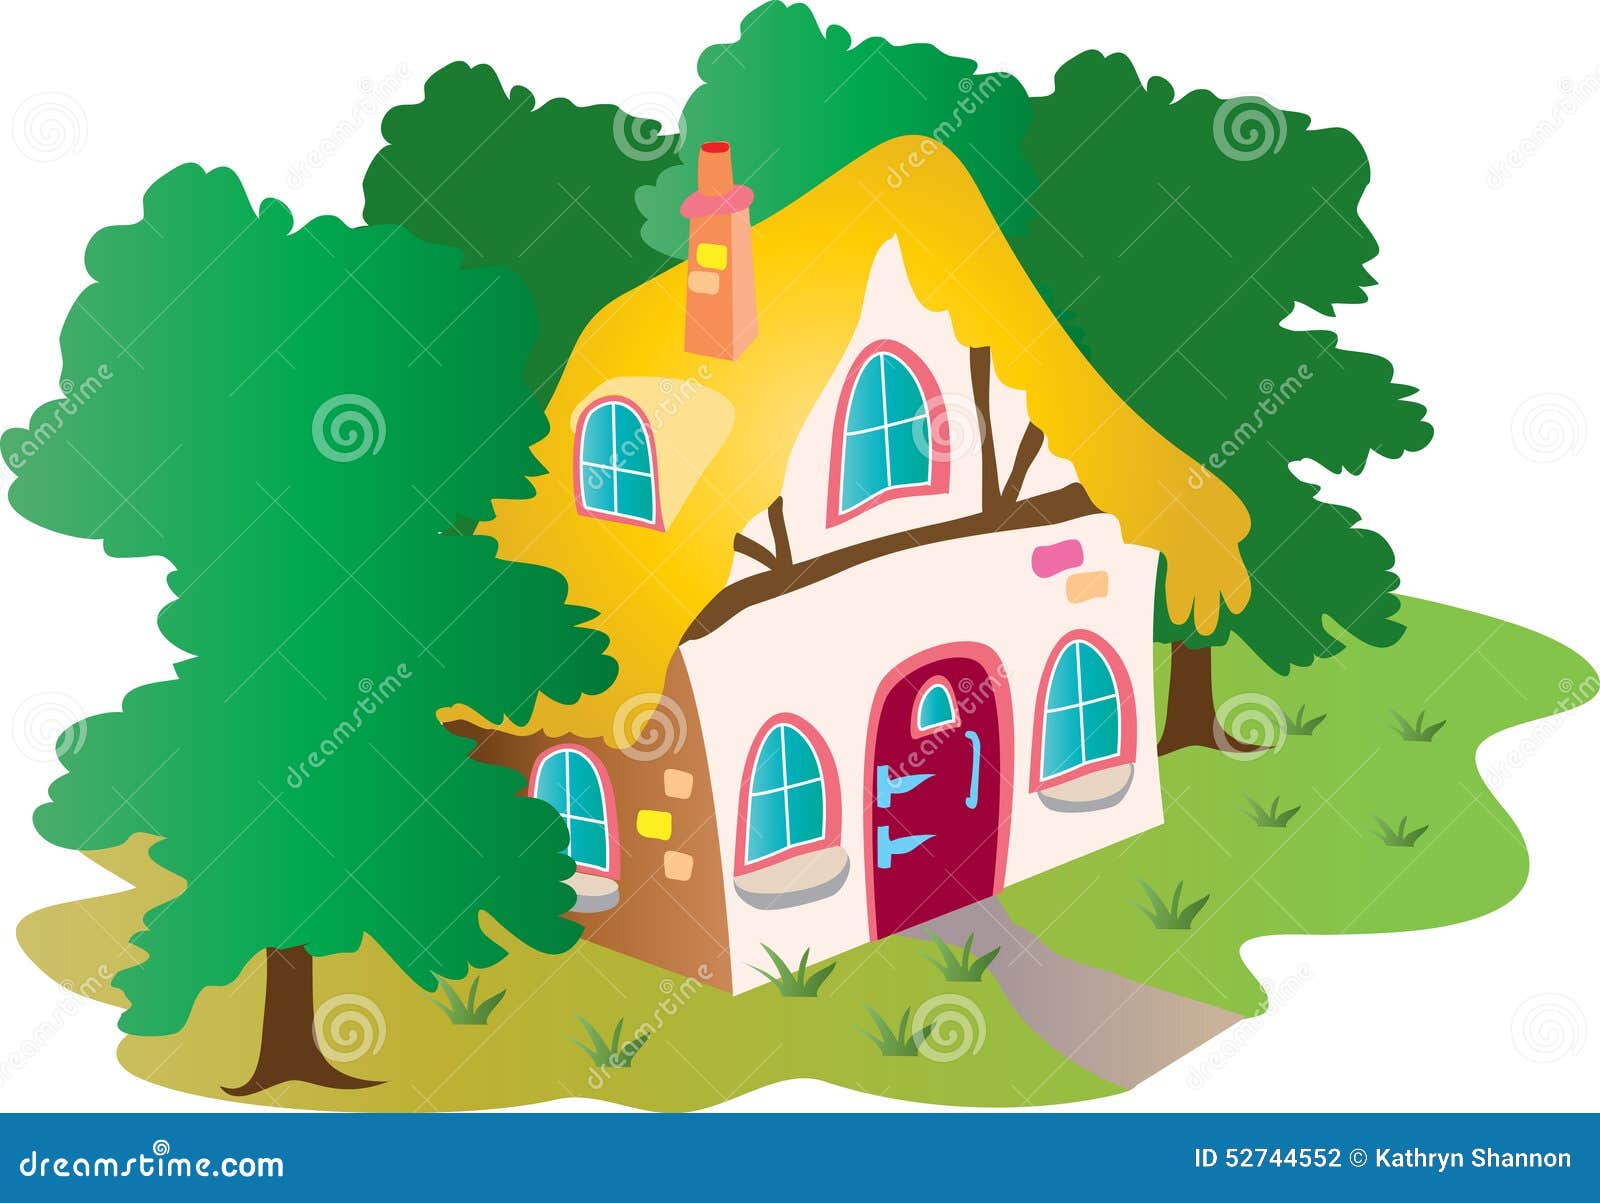 Cottage in the woods stock vector. Illustration of thatched - 52744552